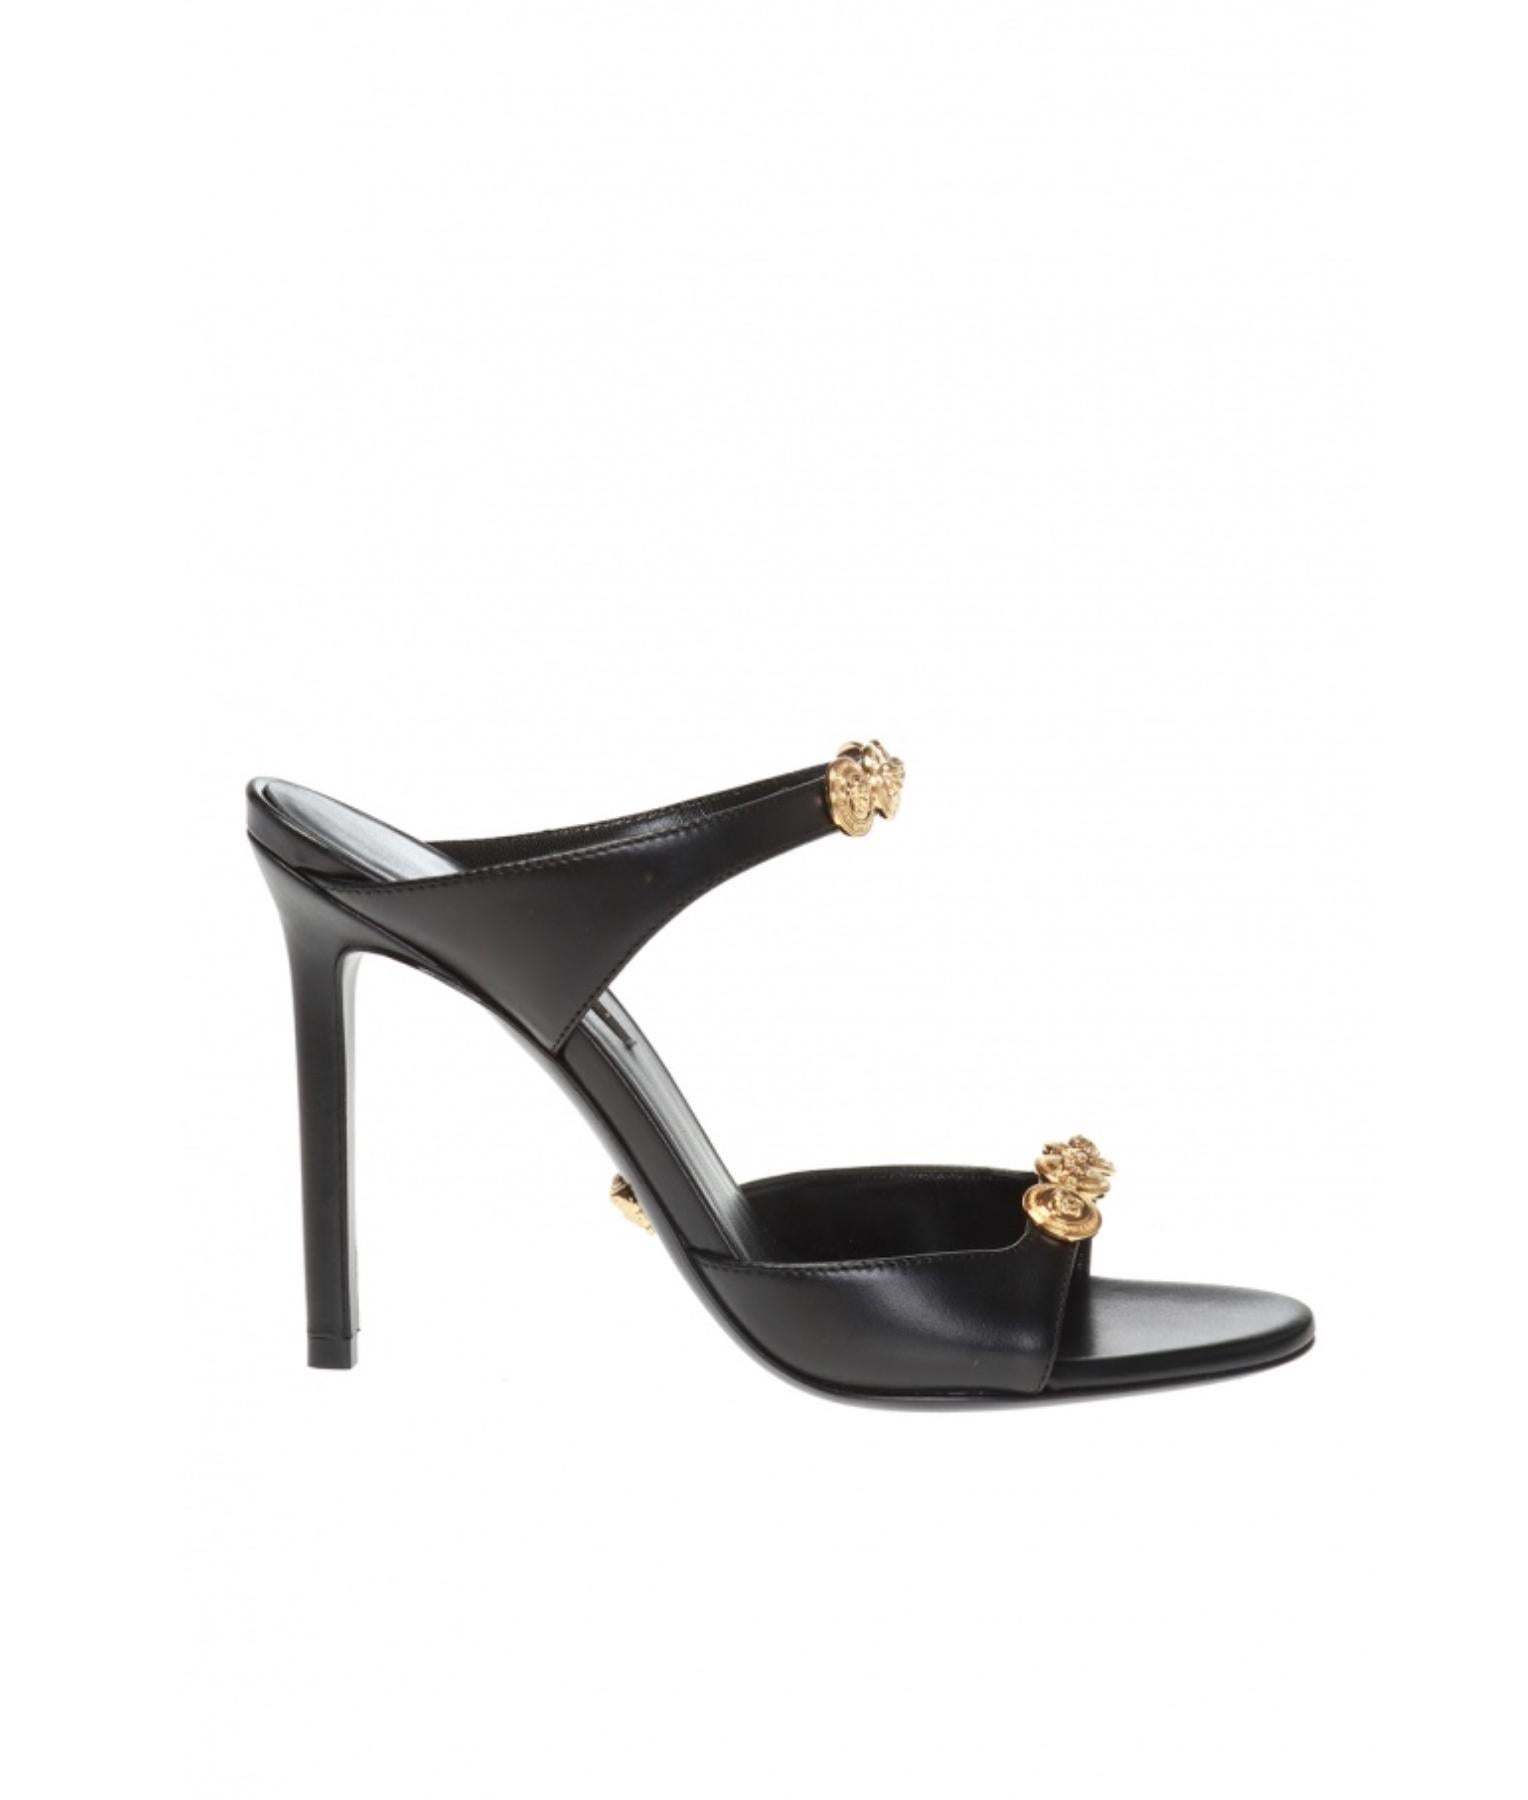 These Versace black stiletto mules feature calf leather and gold-tone Medusa medallions studded around the straps. Brand new and never owned, however they have been tried on by a client in store, leaving very minor dents in the sole. Made in